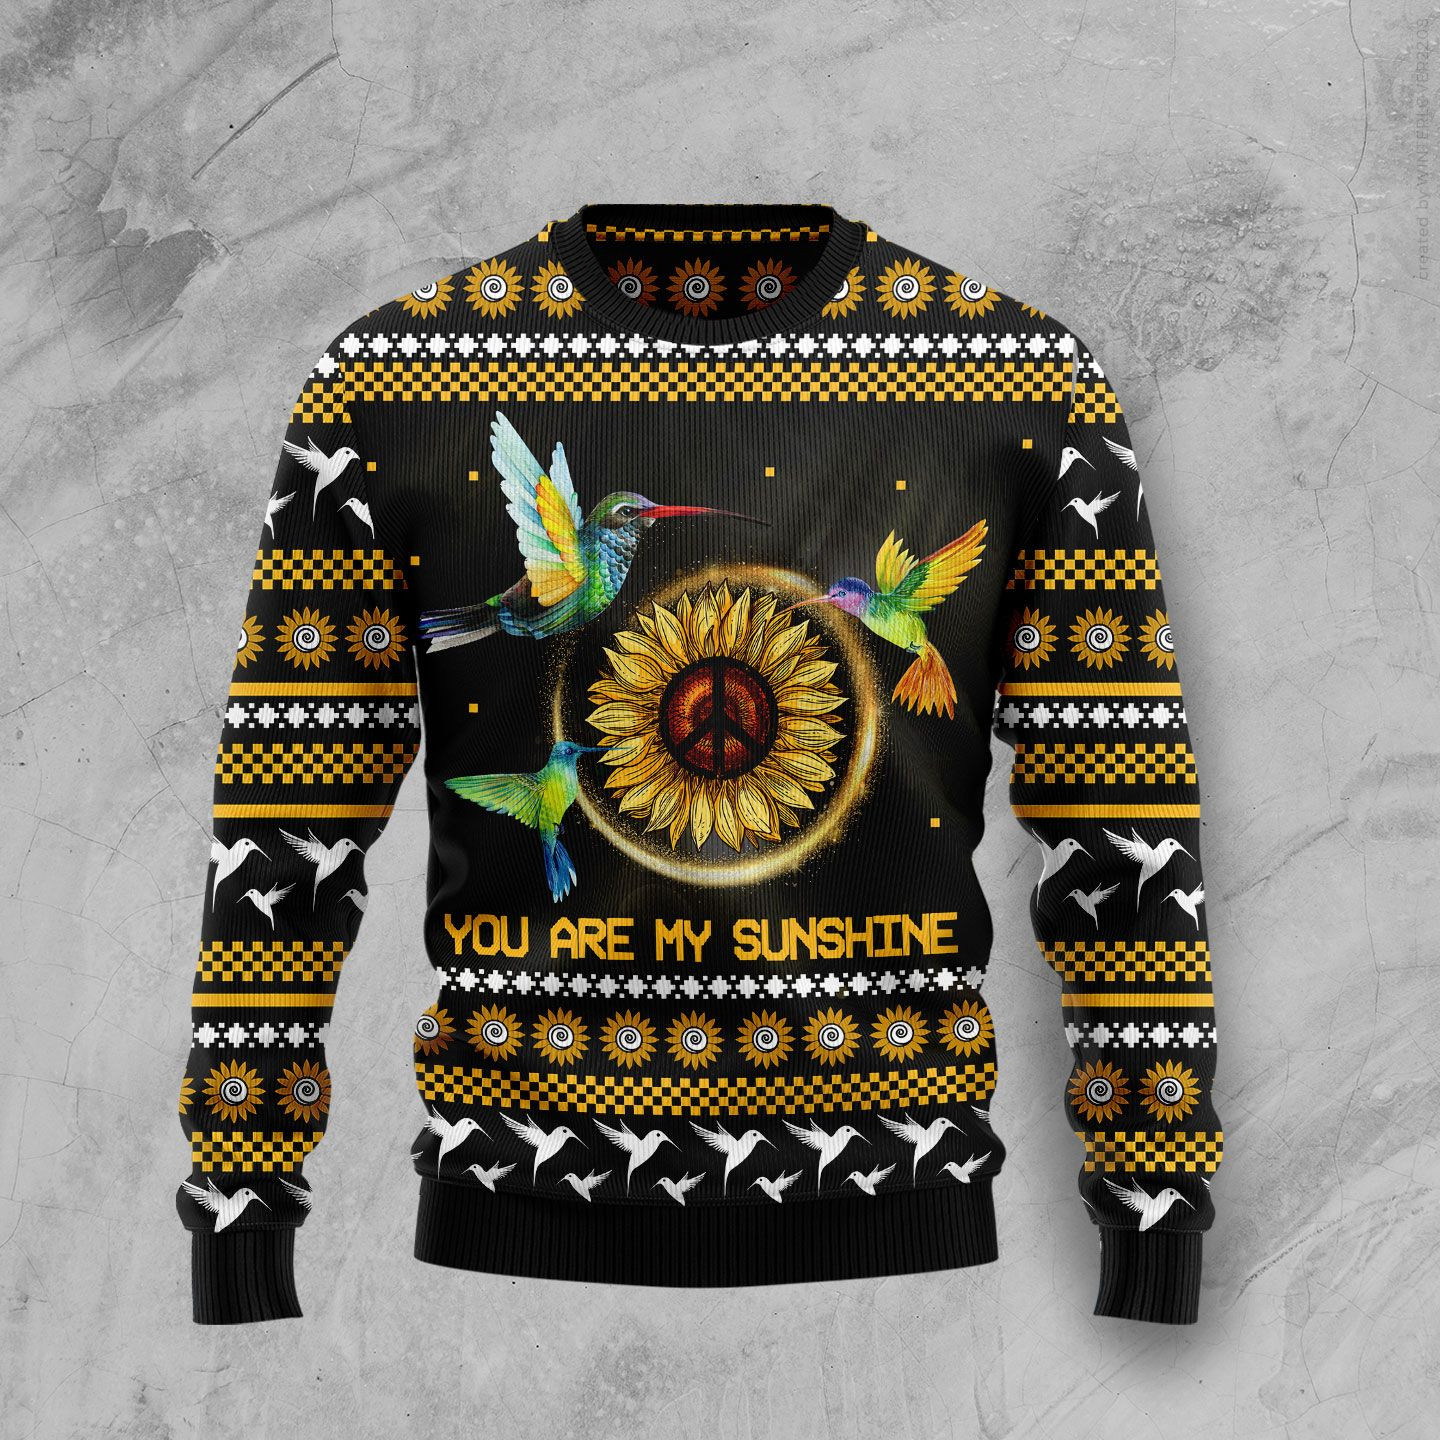 Hummingbird Sunflower Ugly Christmas Sweater, Ugly Sweater For Men Women, Holiday Sweater